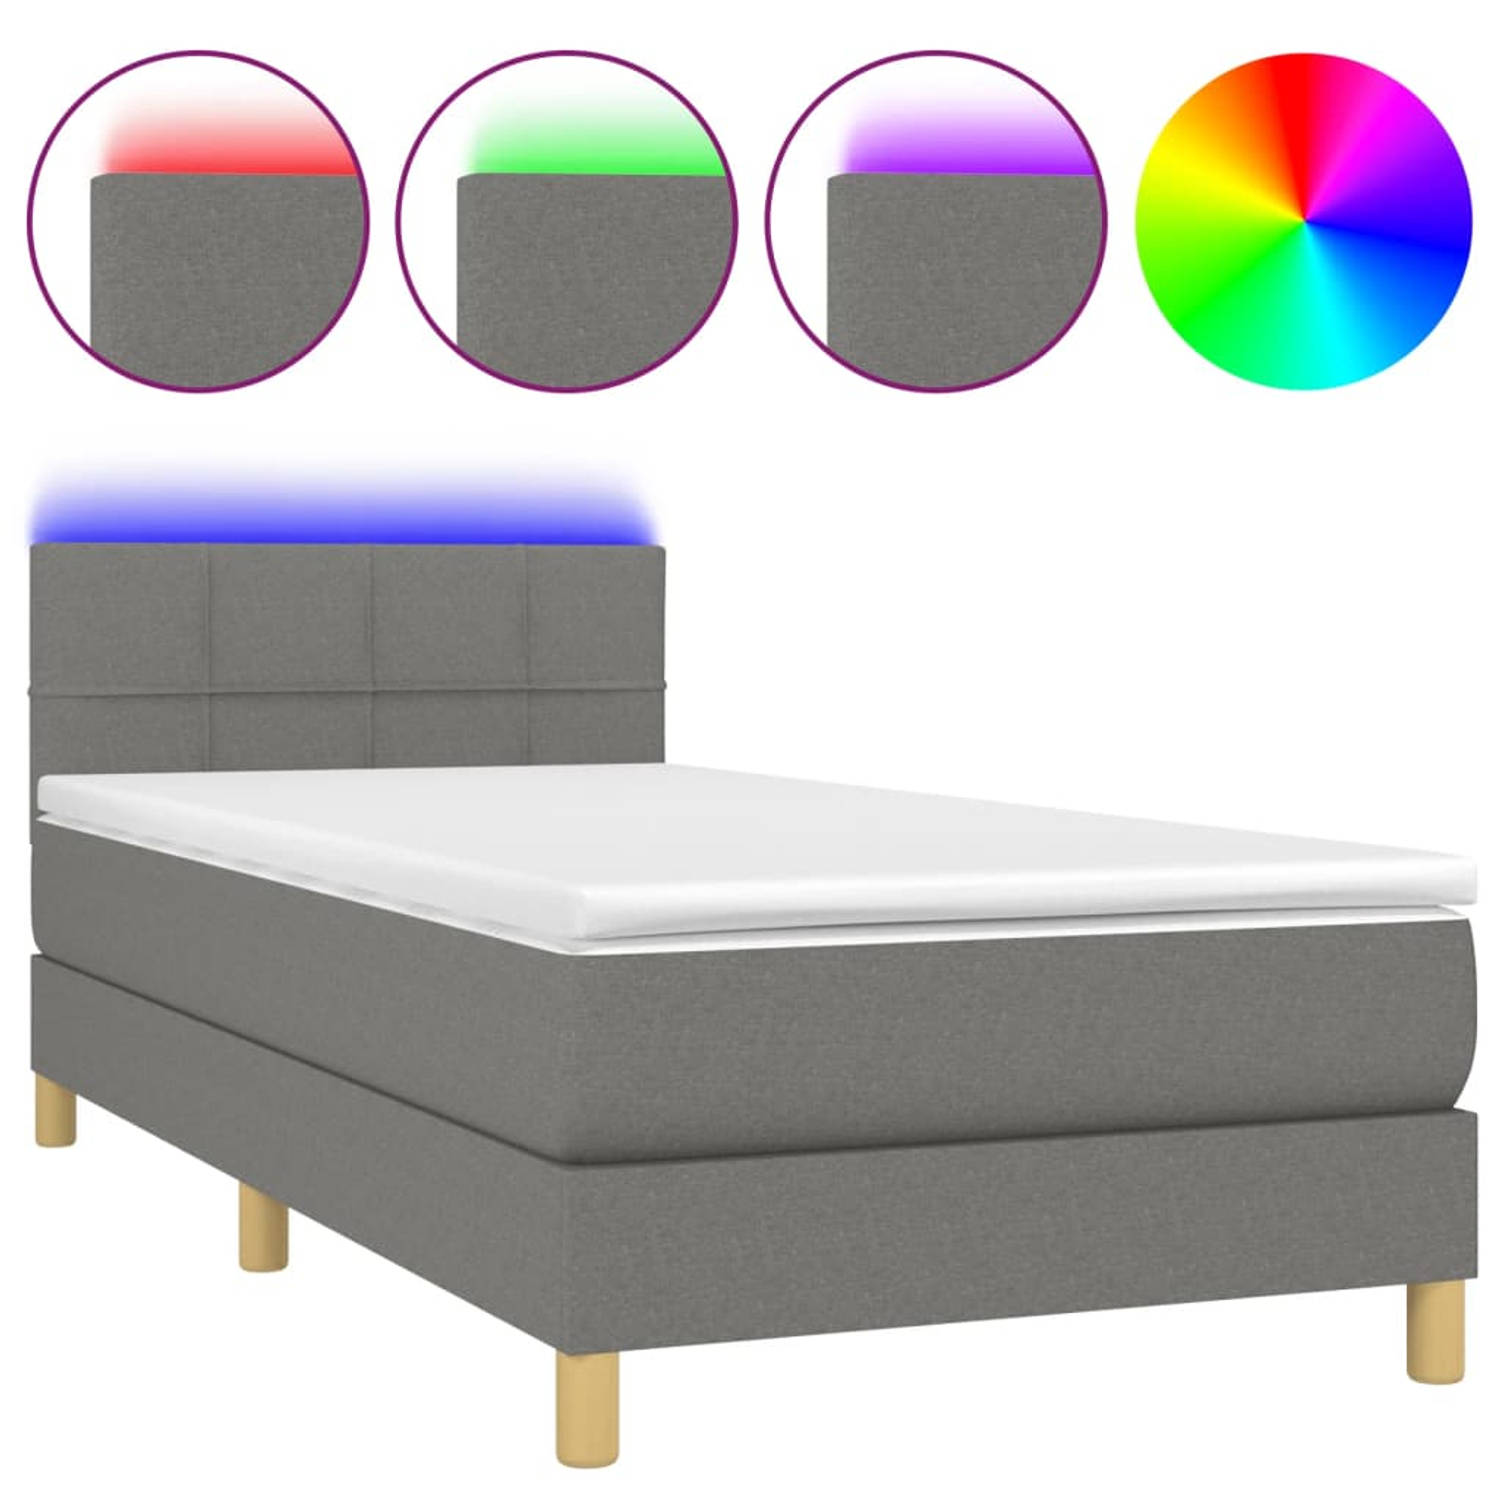 The Living Store Boxspring met matras en LED stof donkergrijs 100x200 cm - Boxspring - Boxsprings - Bed - Slaapmeubel - Boxspringbed - Boxspring Bed - Tweepersoonsbed - Bed Met Mat